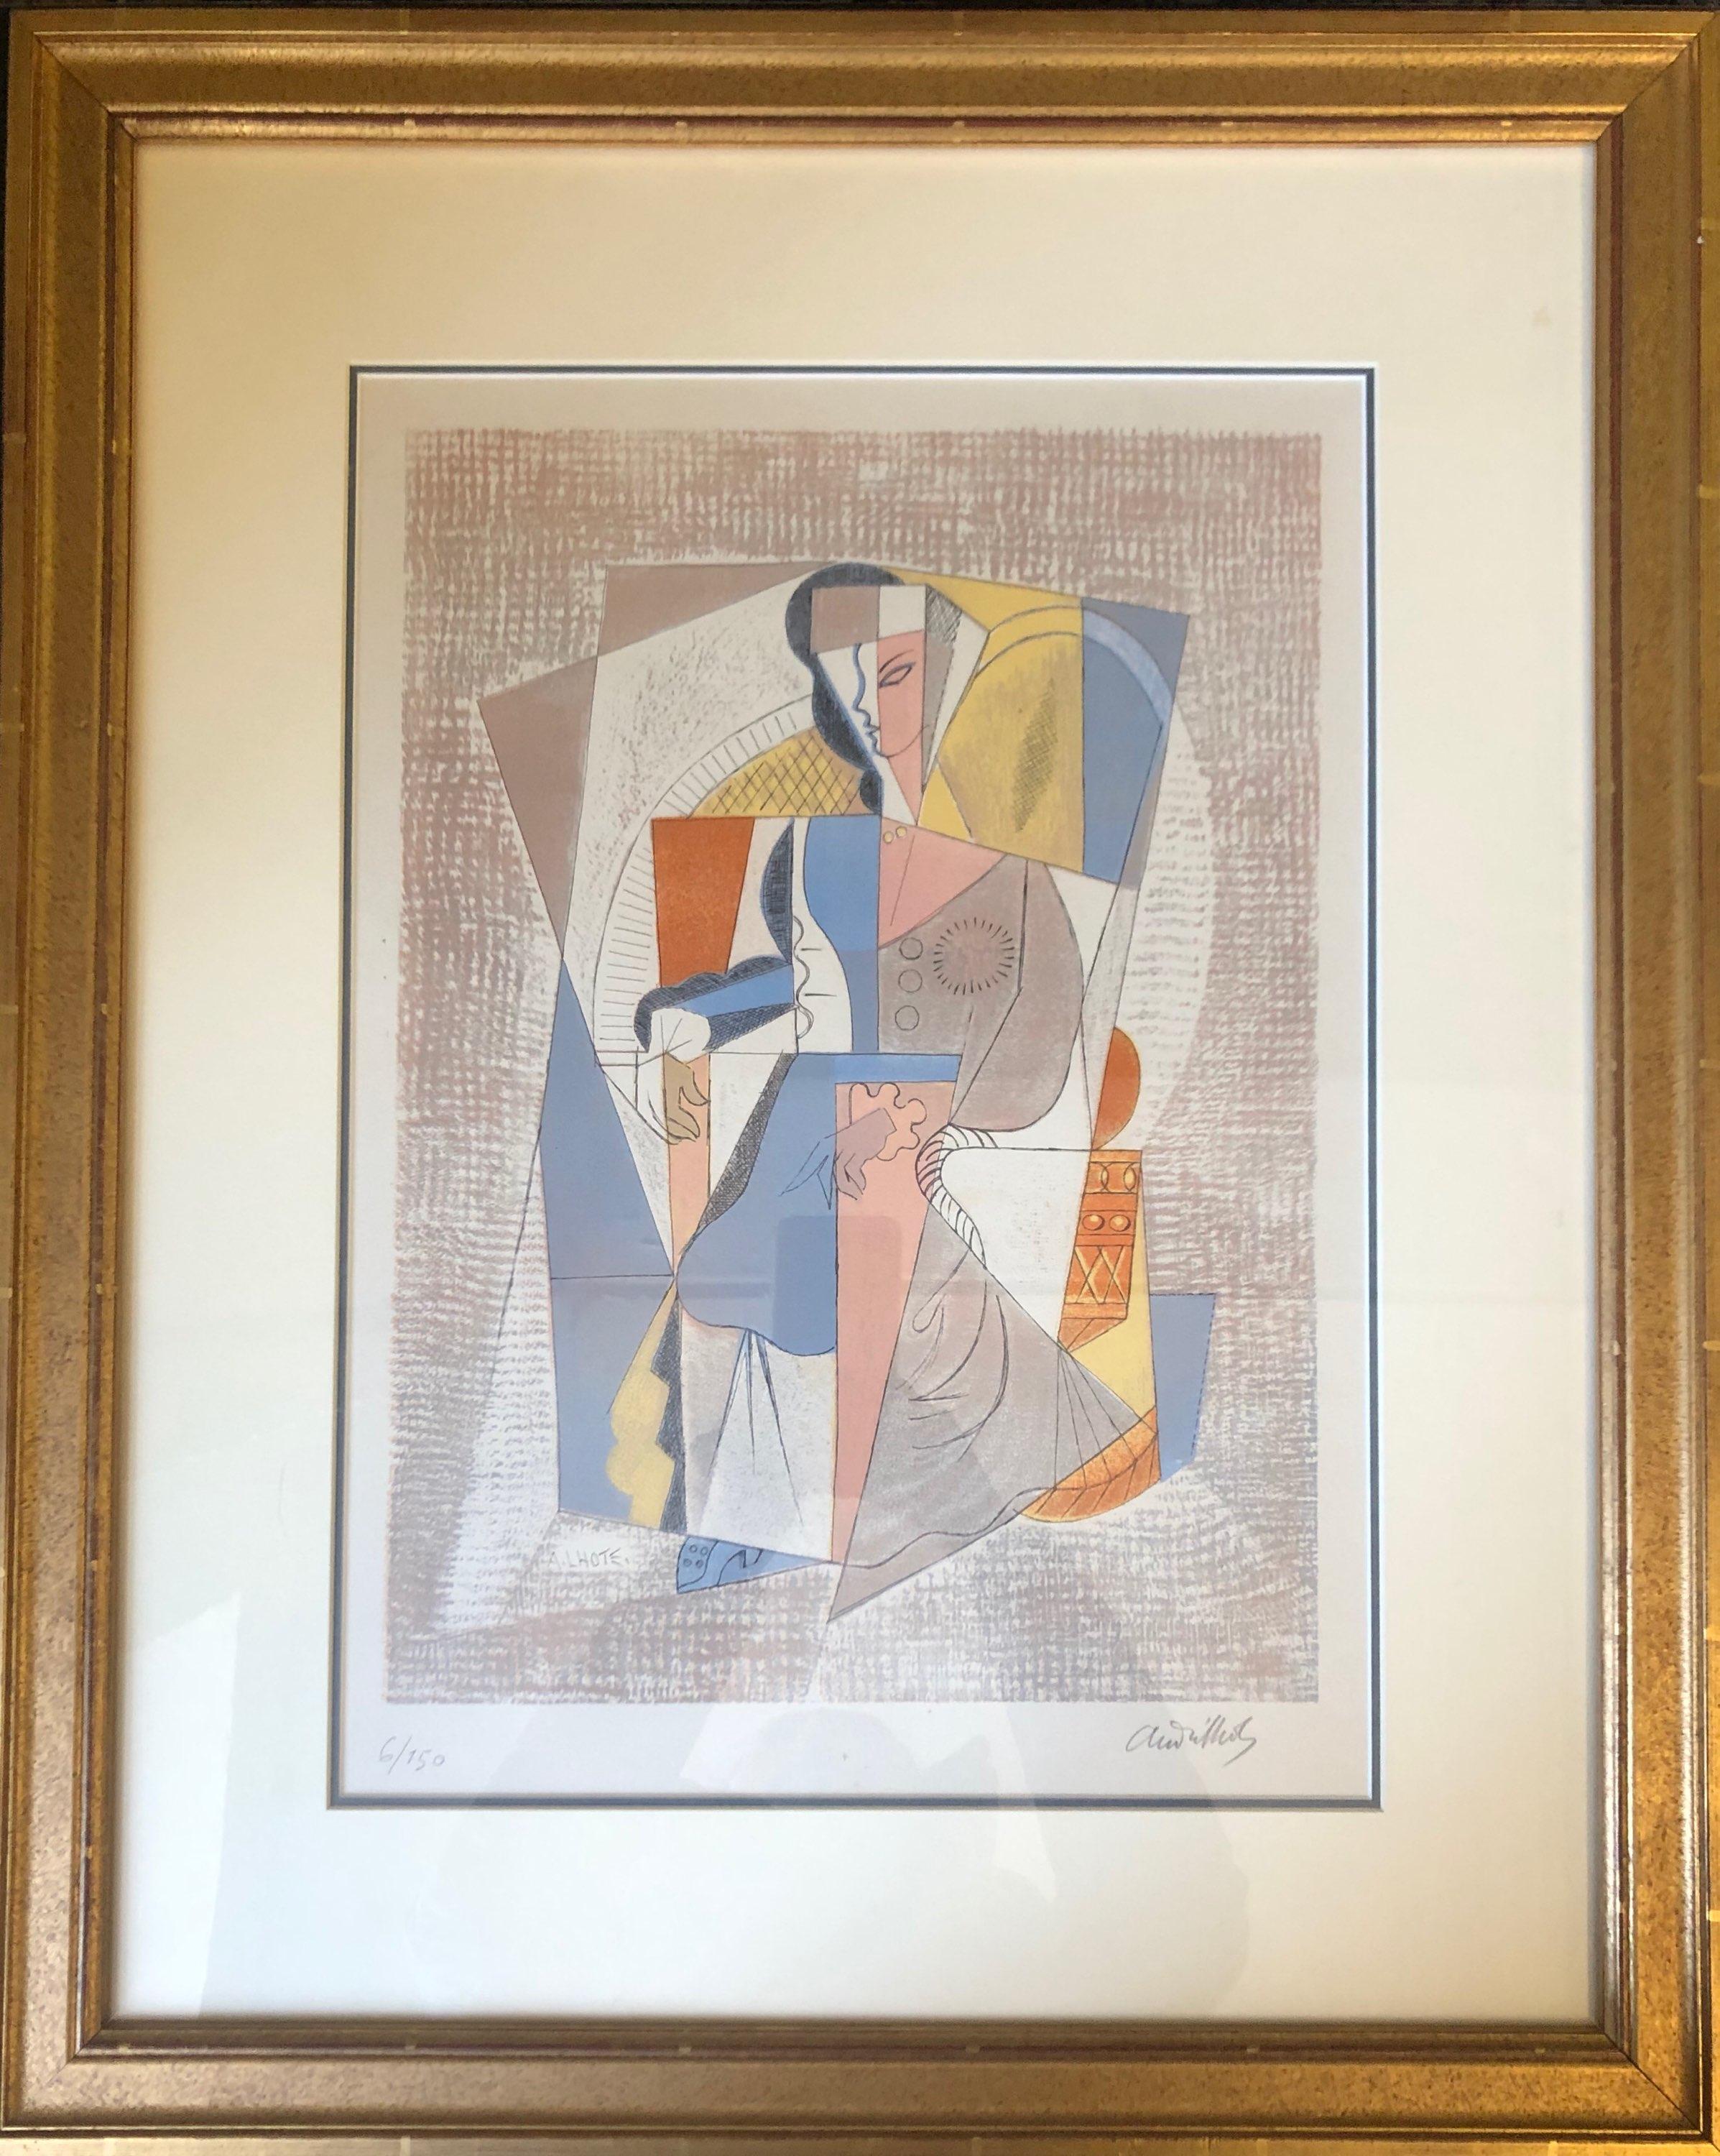 Femme Assise, Hand-Signed, Limited Edition Cubist Lithograph